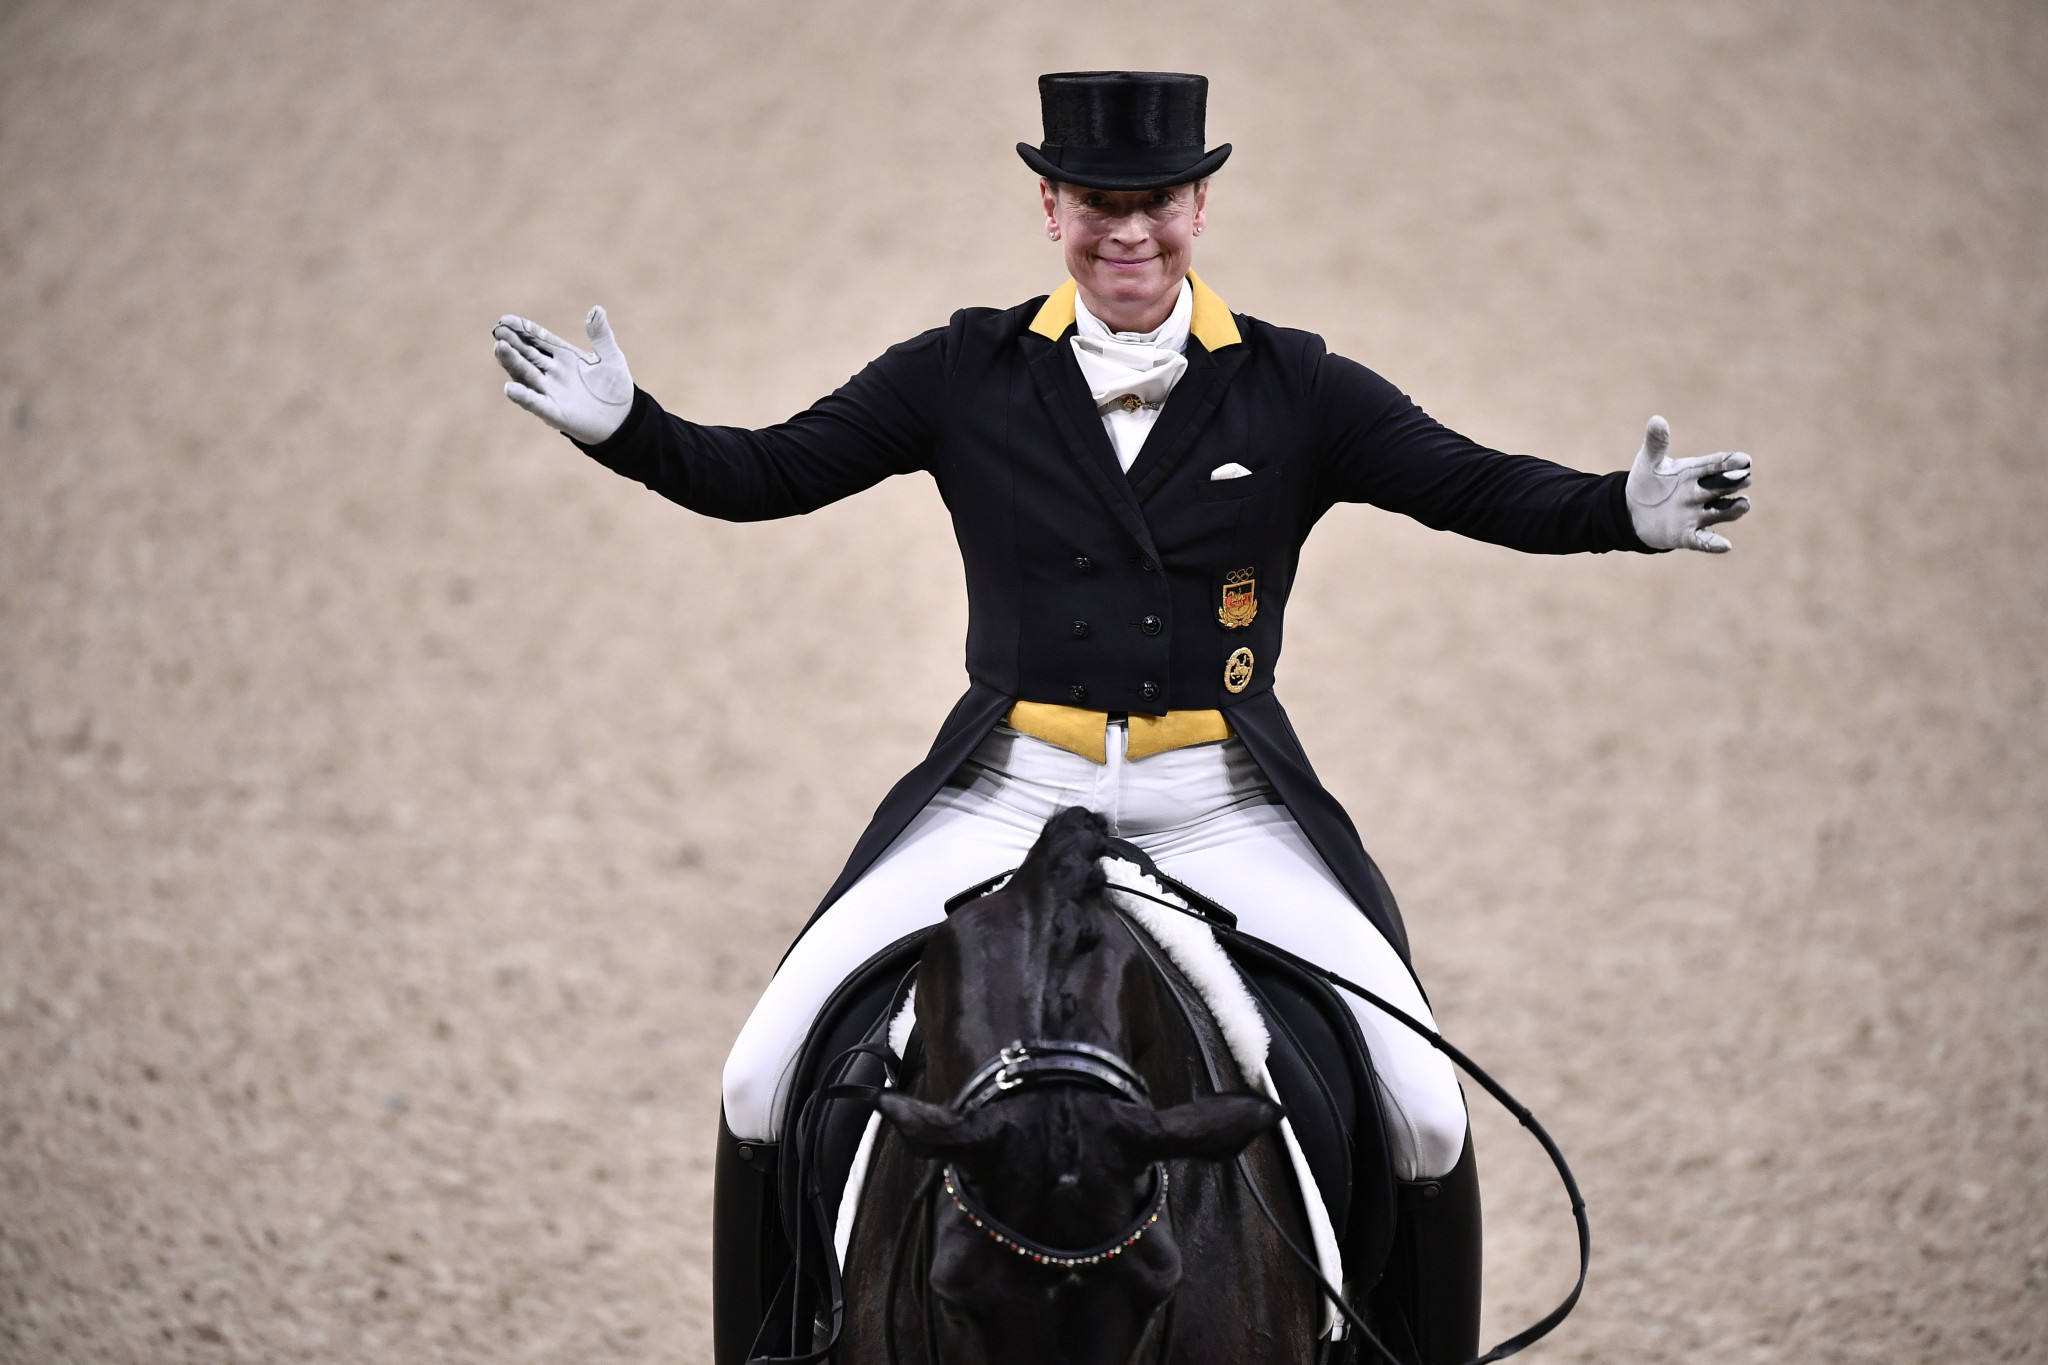 Werth in pole position for third successive FEI Dressage World Cup title after first-round win in Gothenburg 